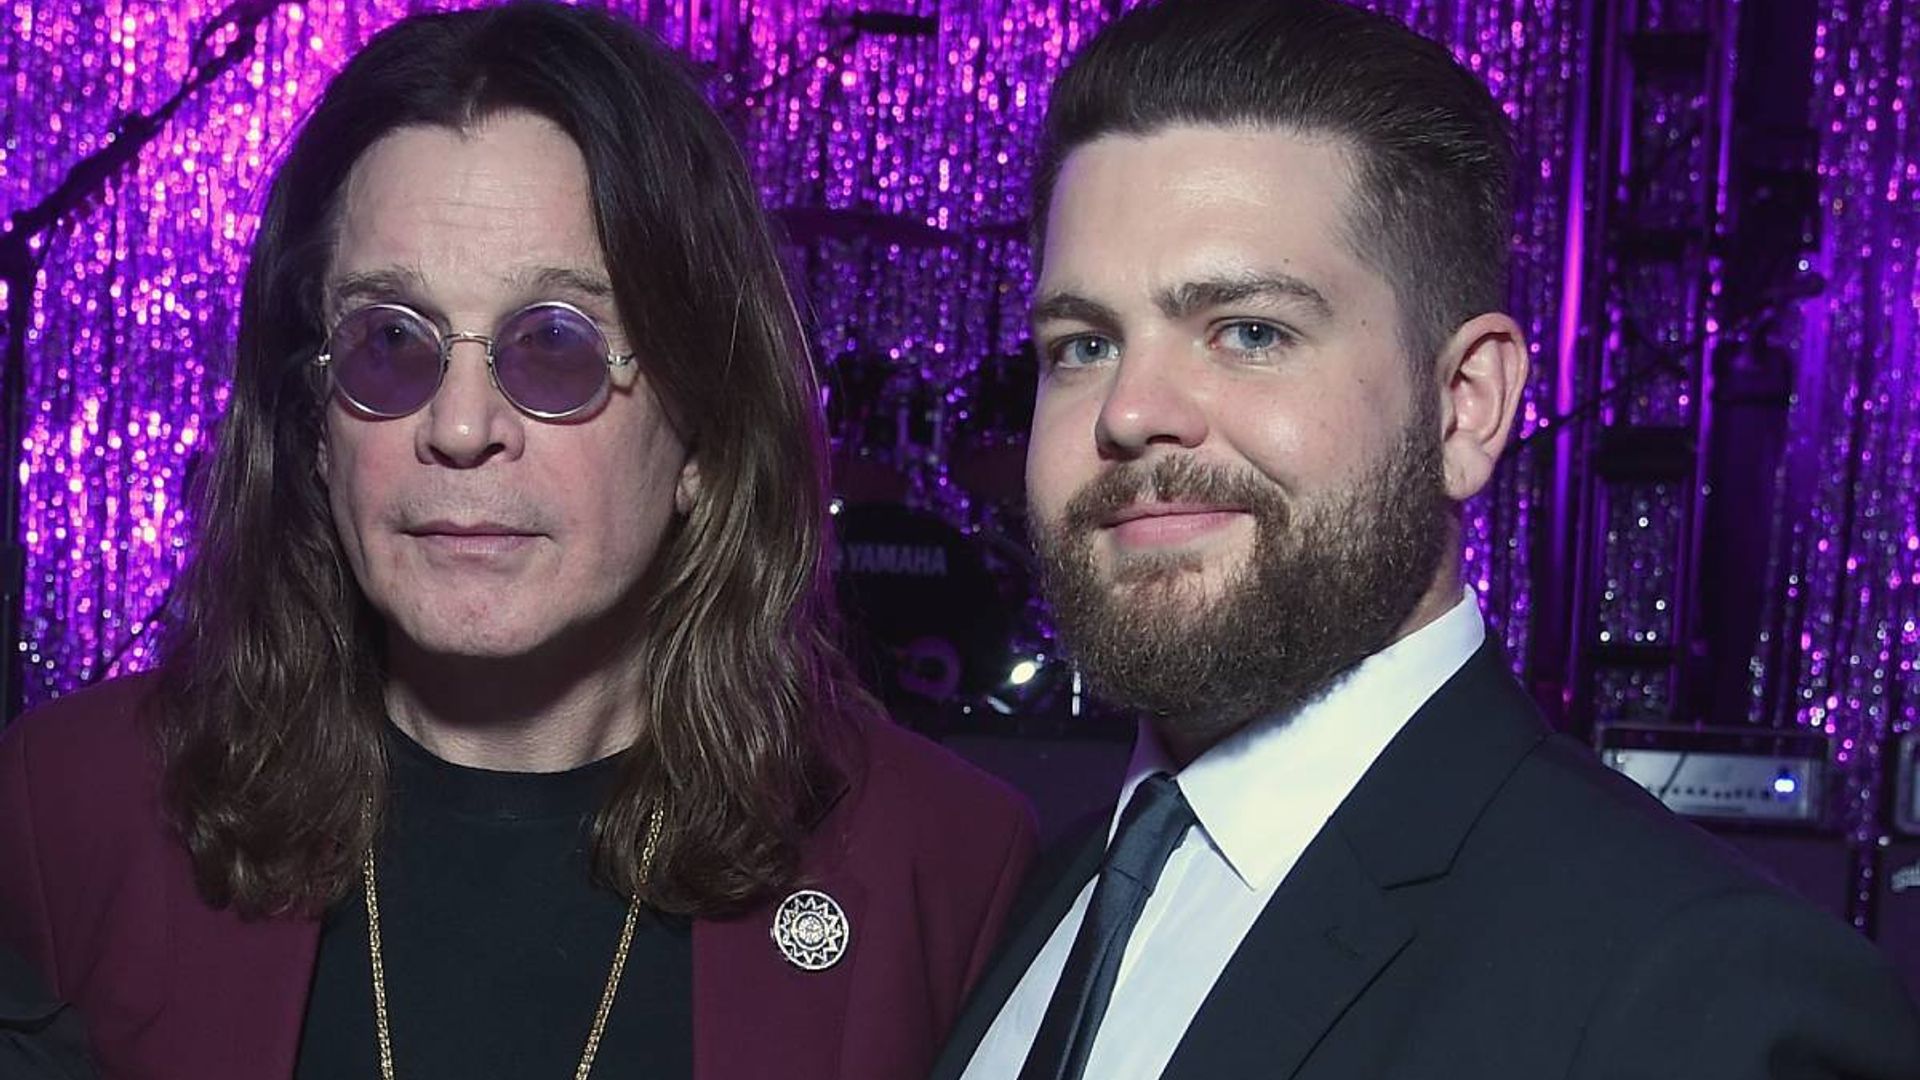 Jack Osbourne shares touching video of dad Ozzy amid new health update